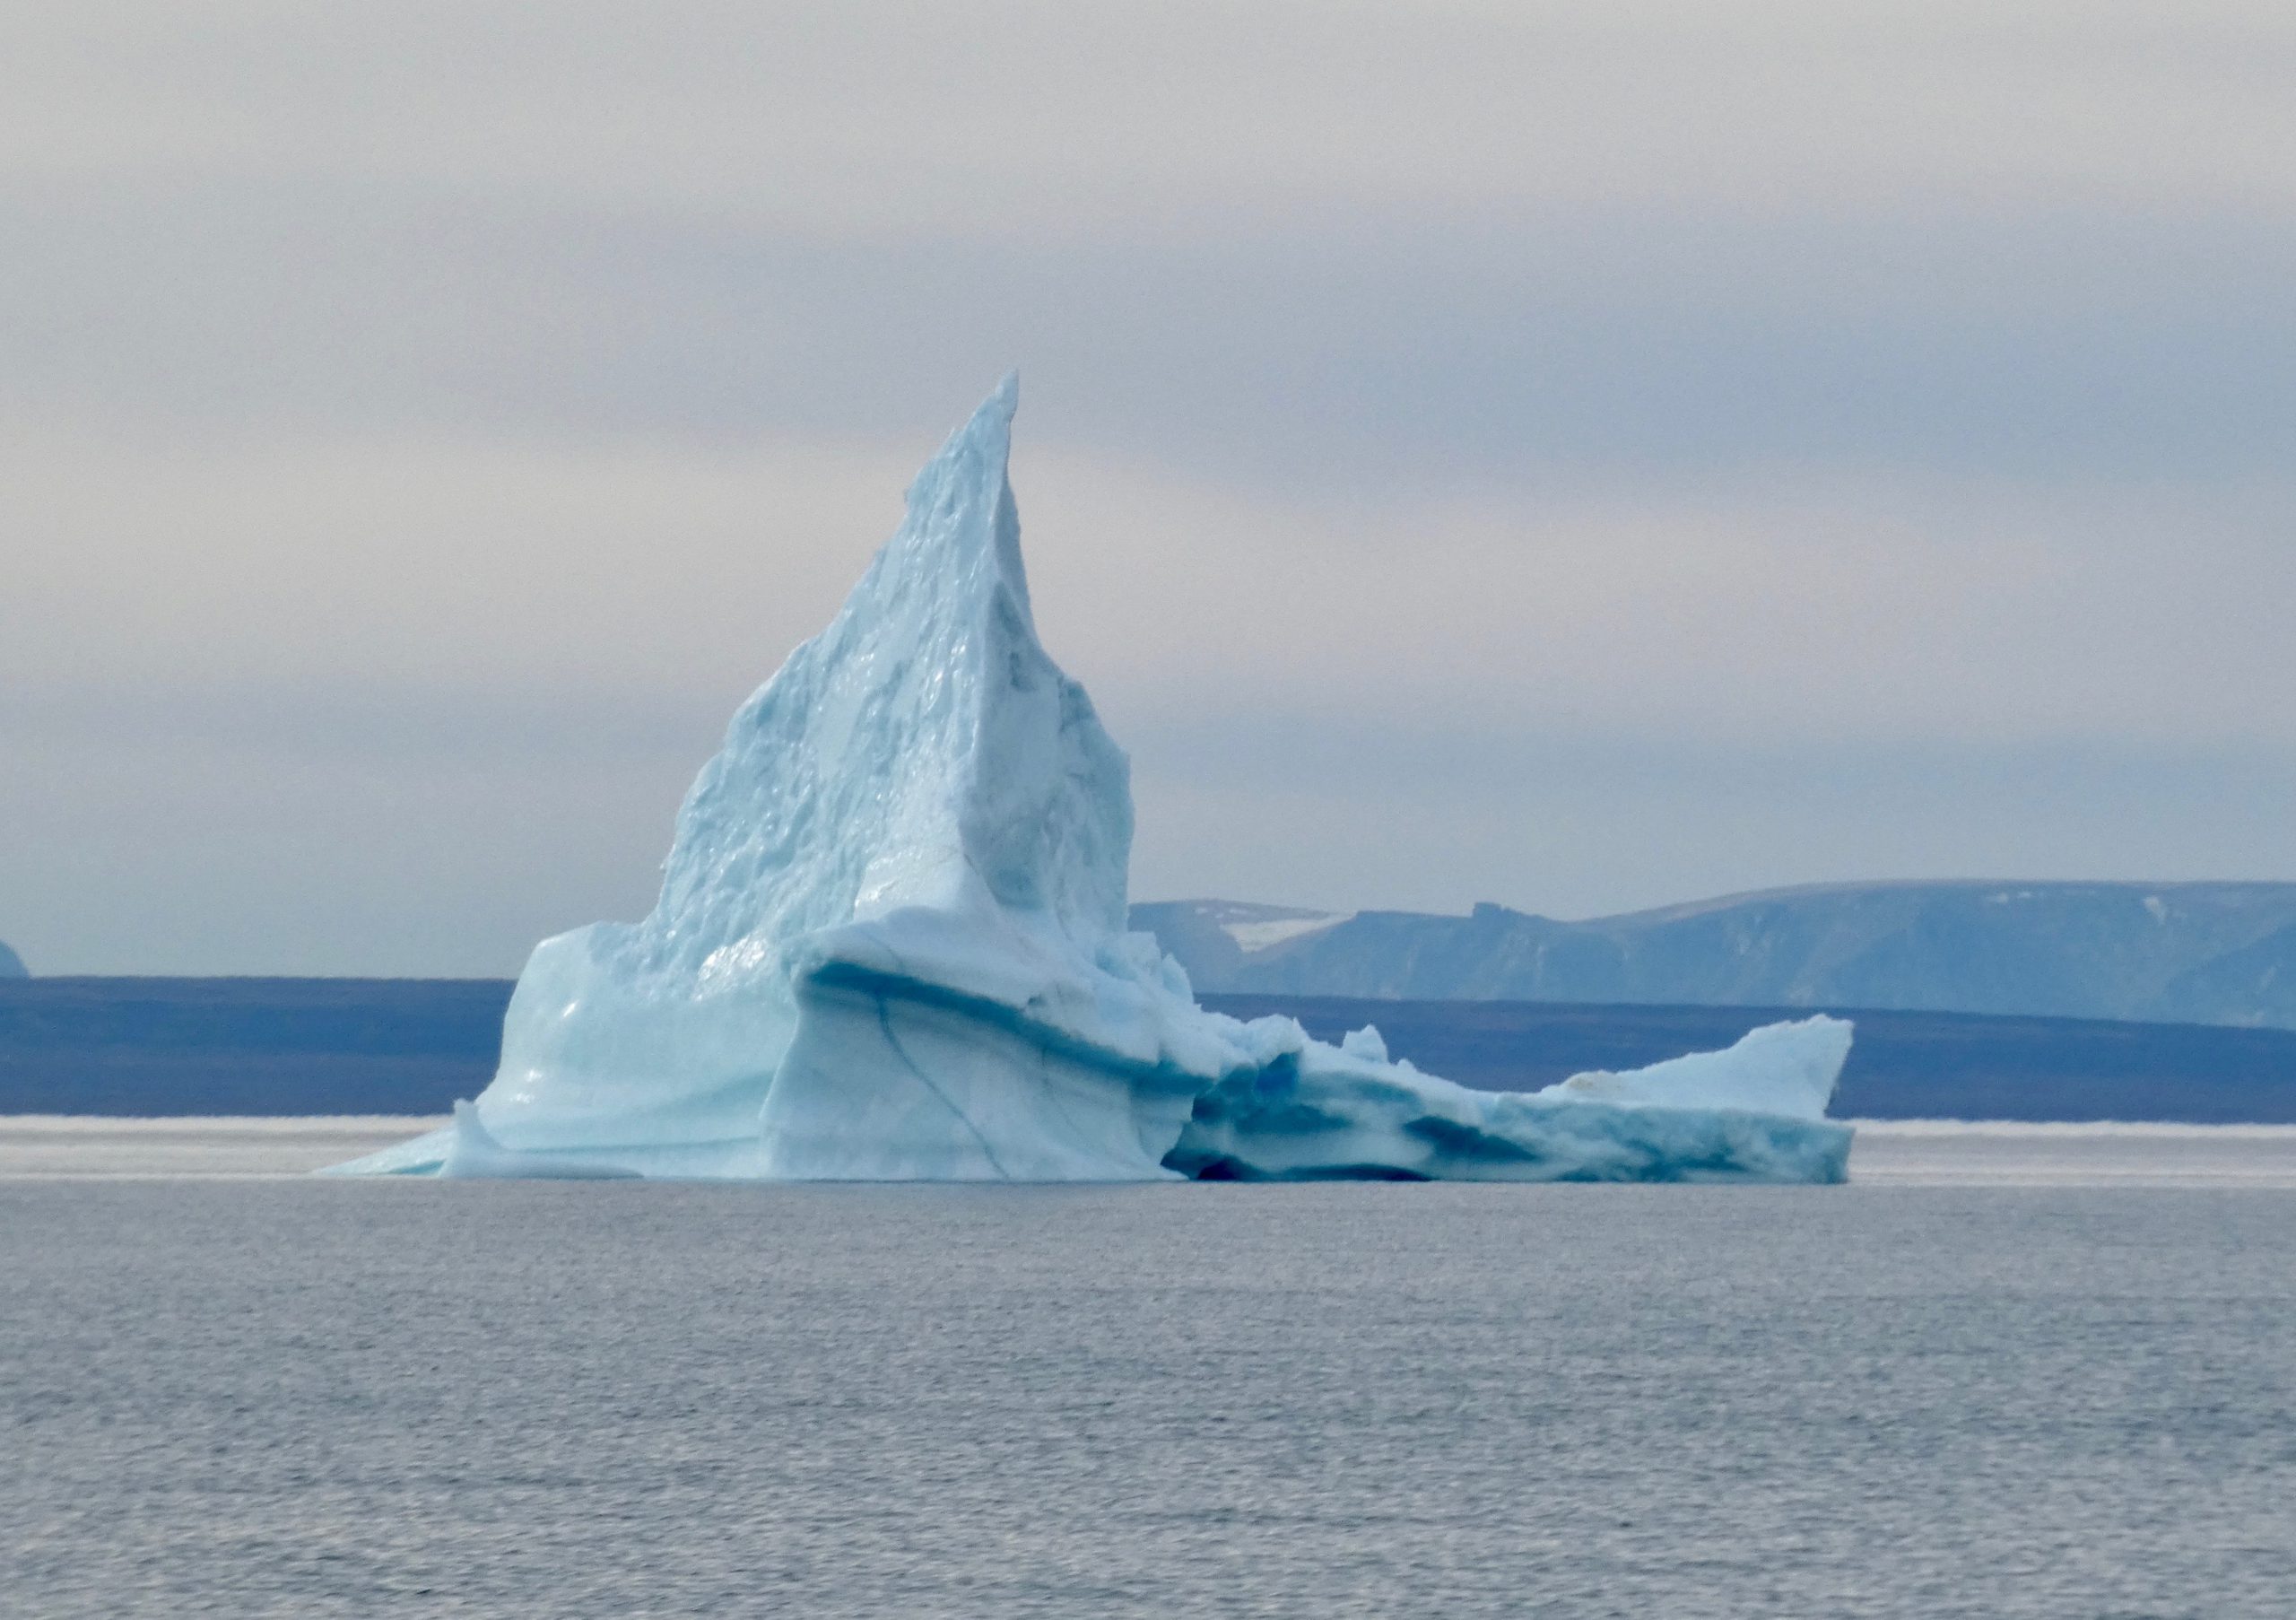 Icebergsongs – For the icebergs. Against global warming